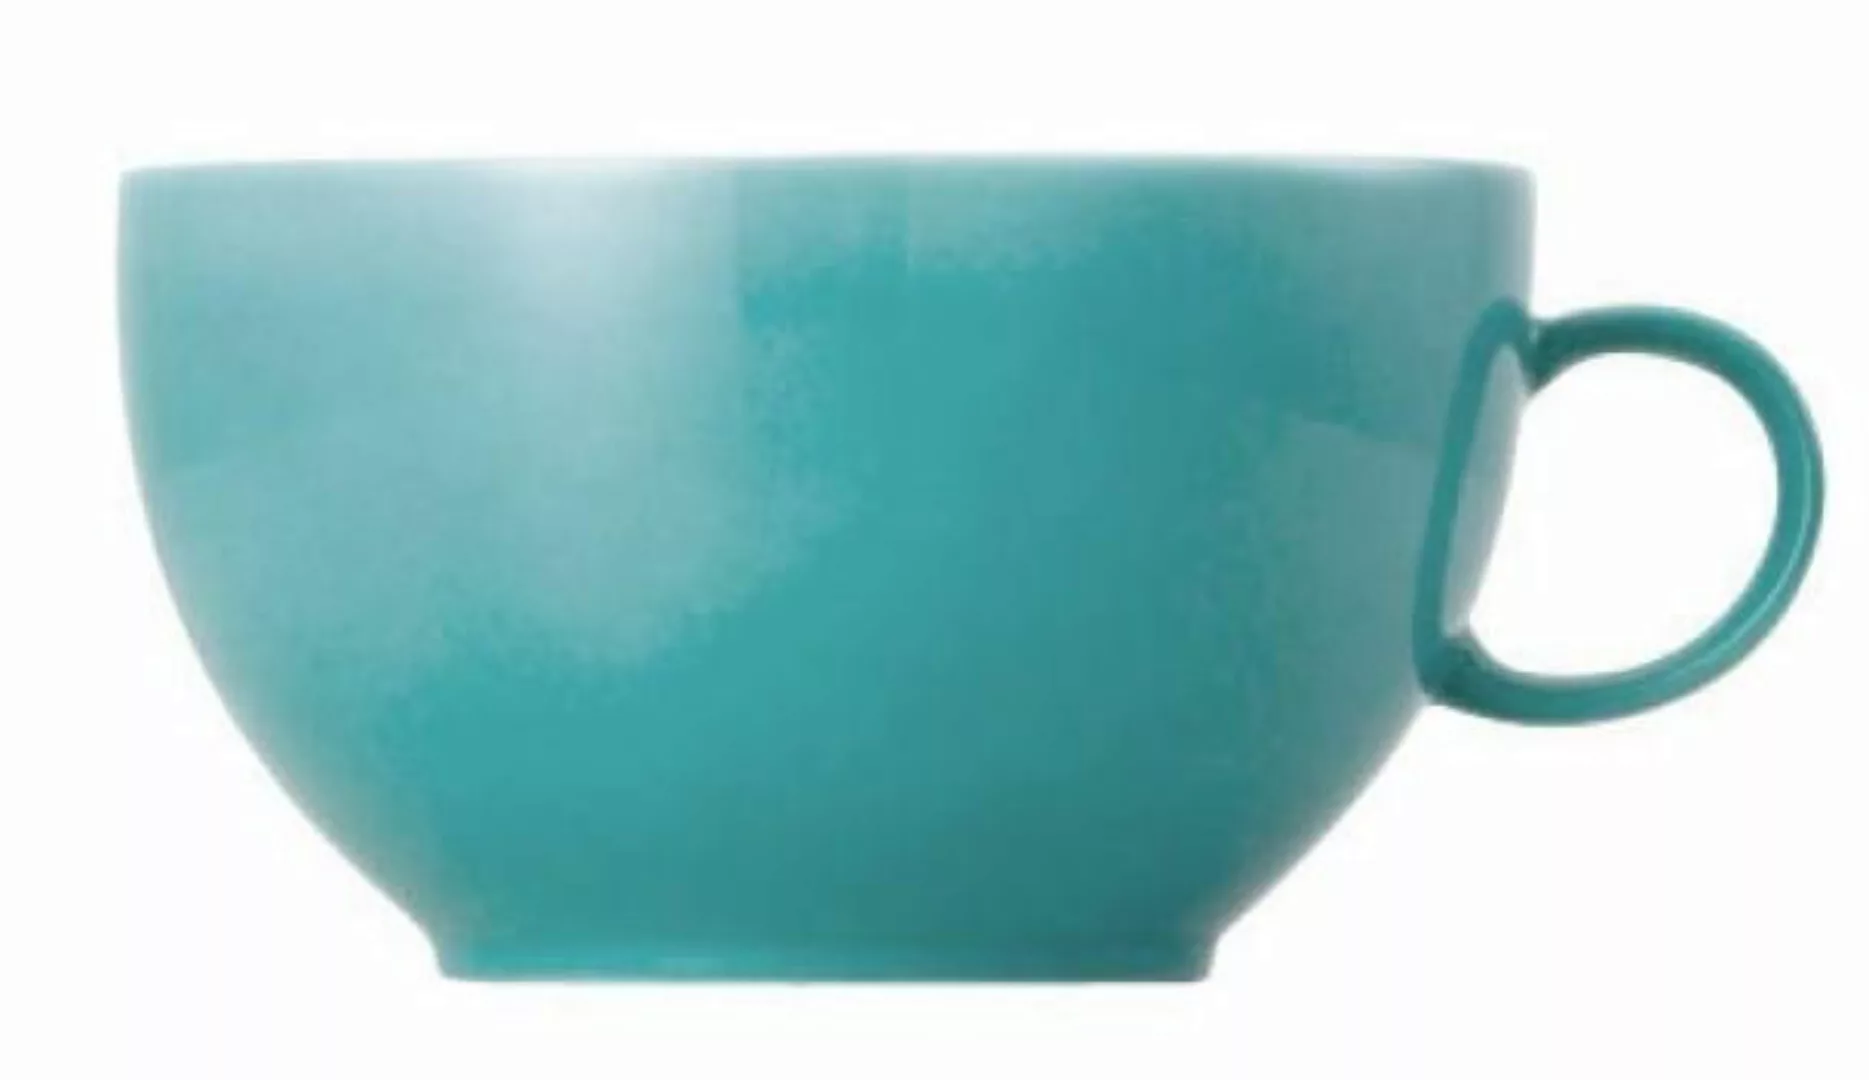 Thomas Sunny Day Turquoise Sunny Day Turquoise Cappuccino-Obertasse 0,38 l günstig online kaufen